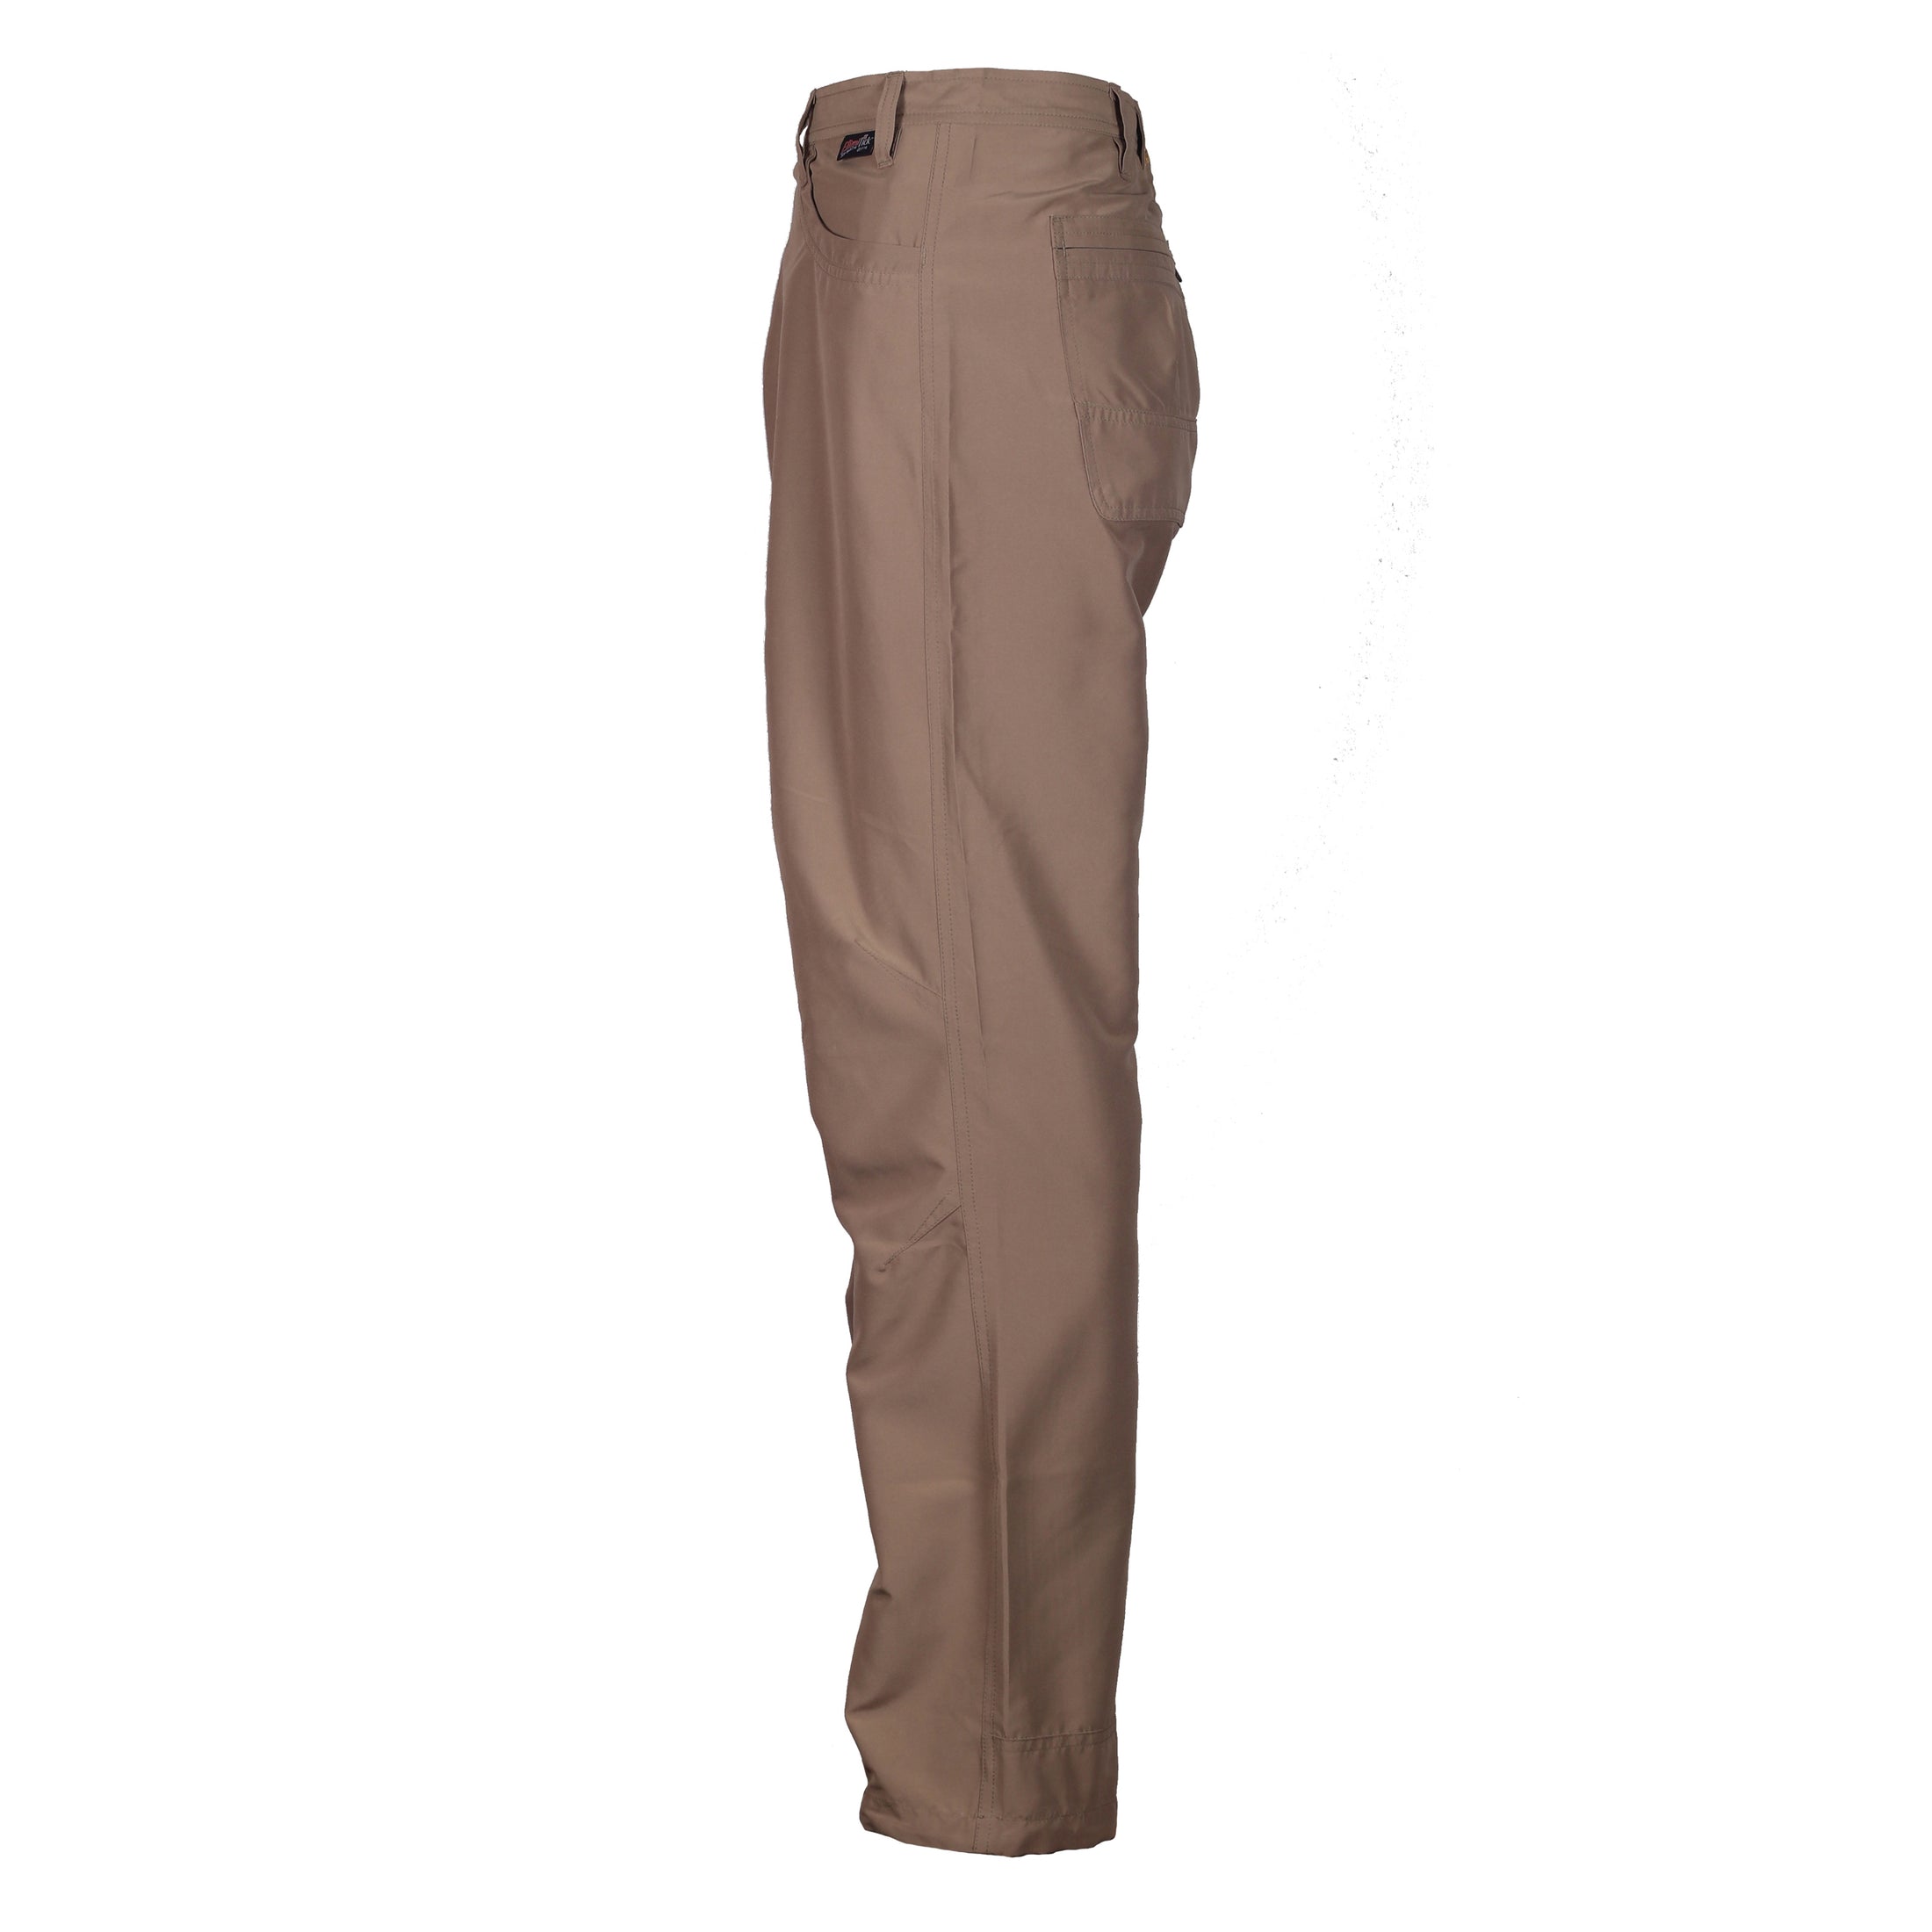 gamehide ElimiTick Insect Repellent Ultra Lite Pant side (tan)